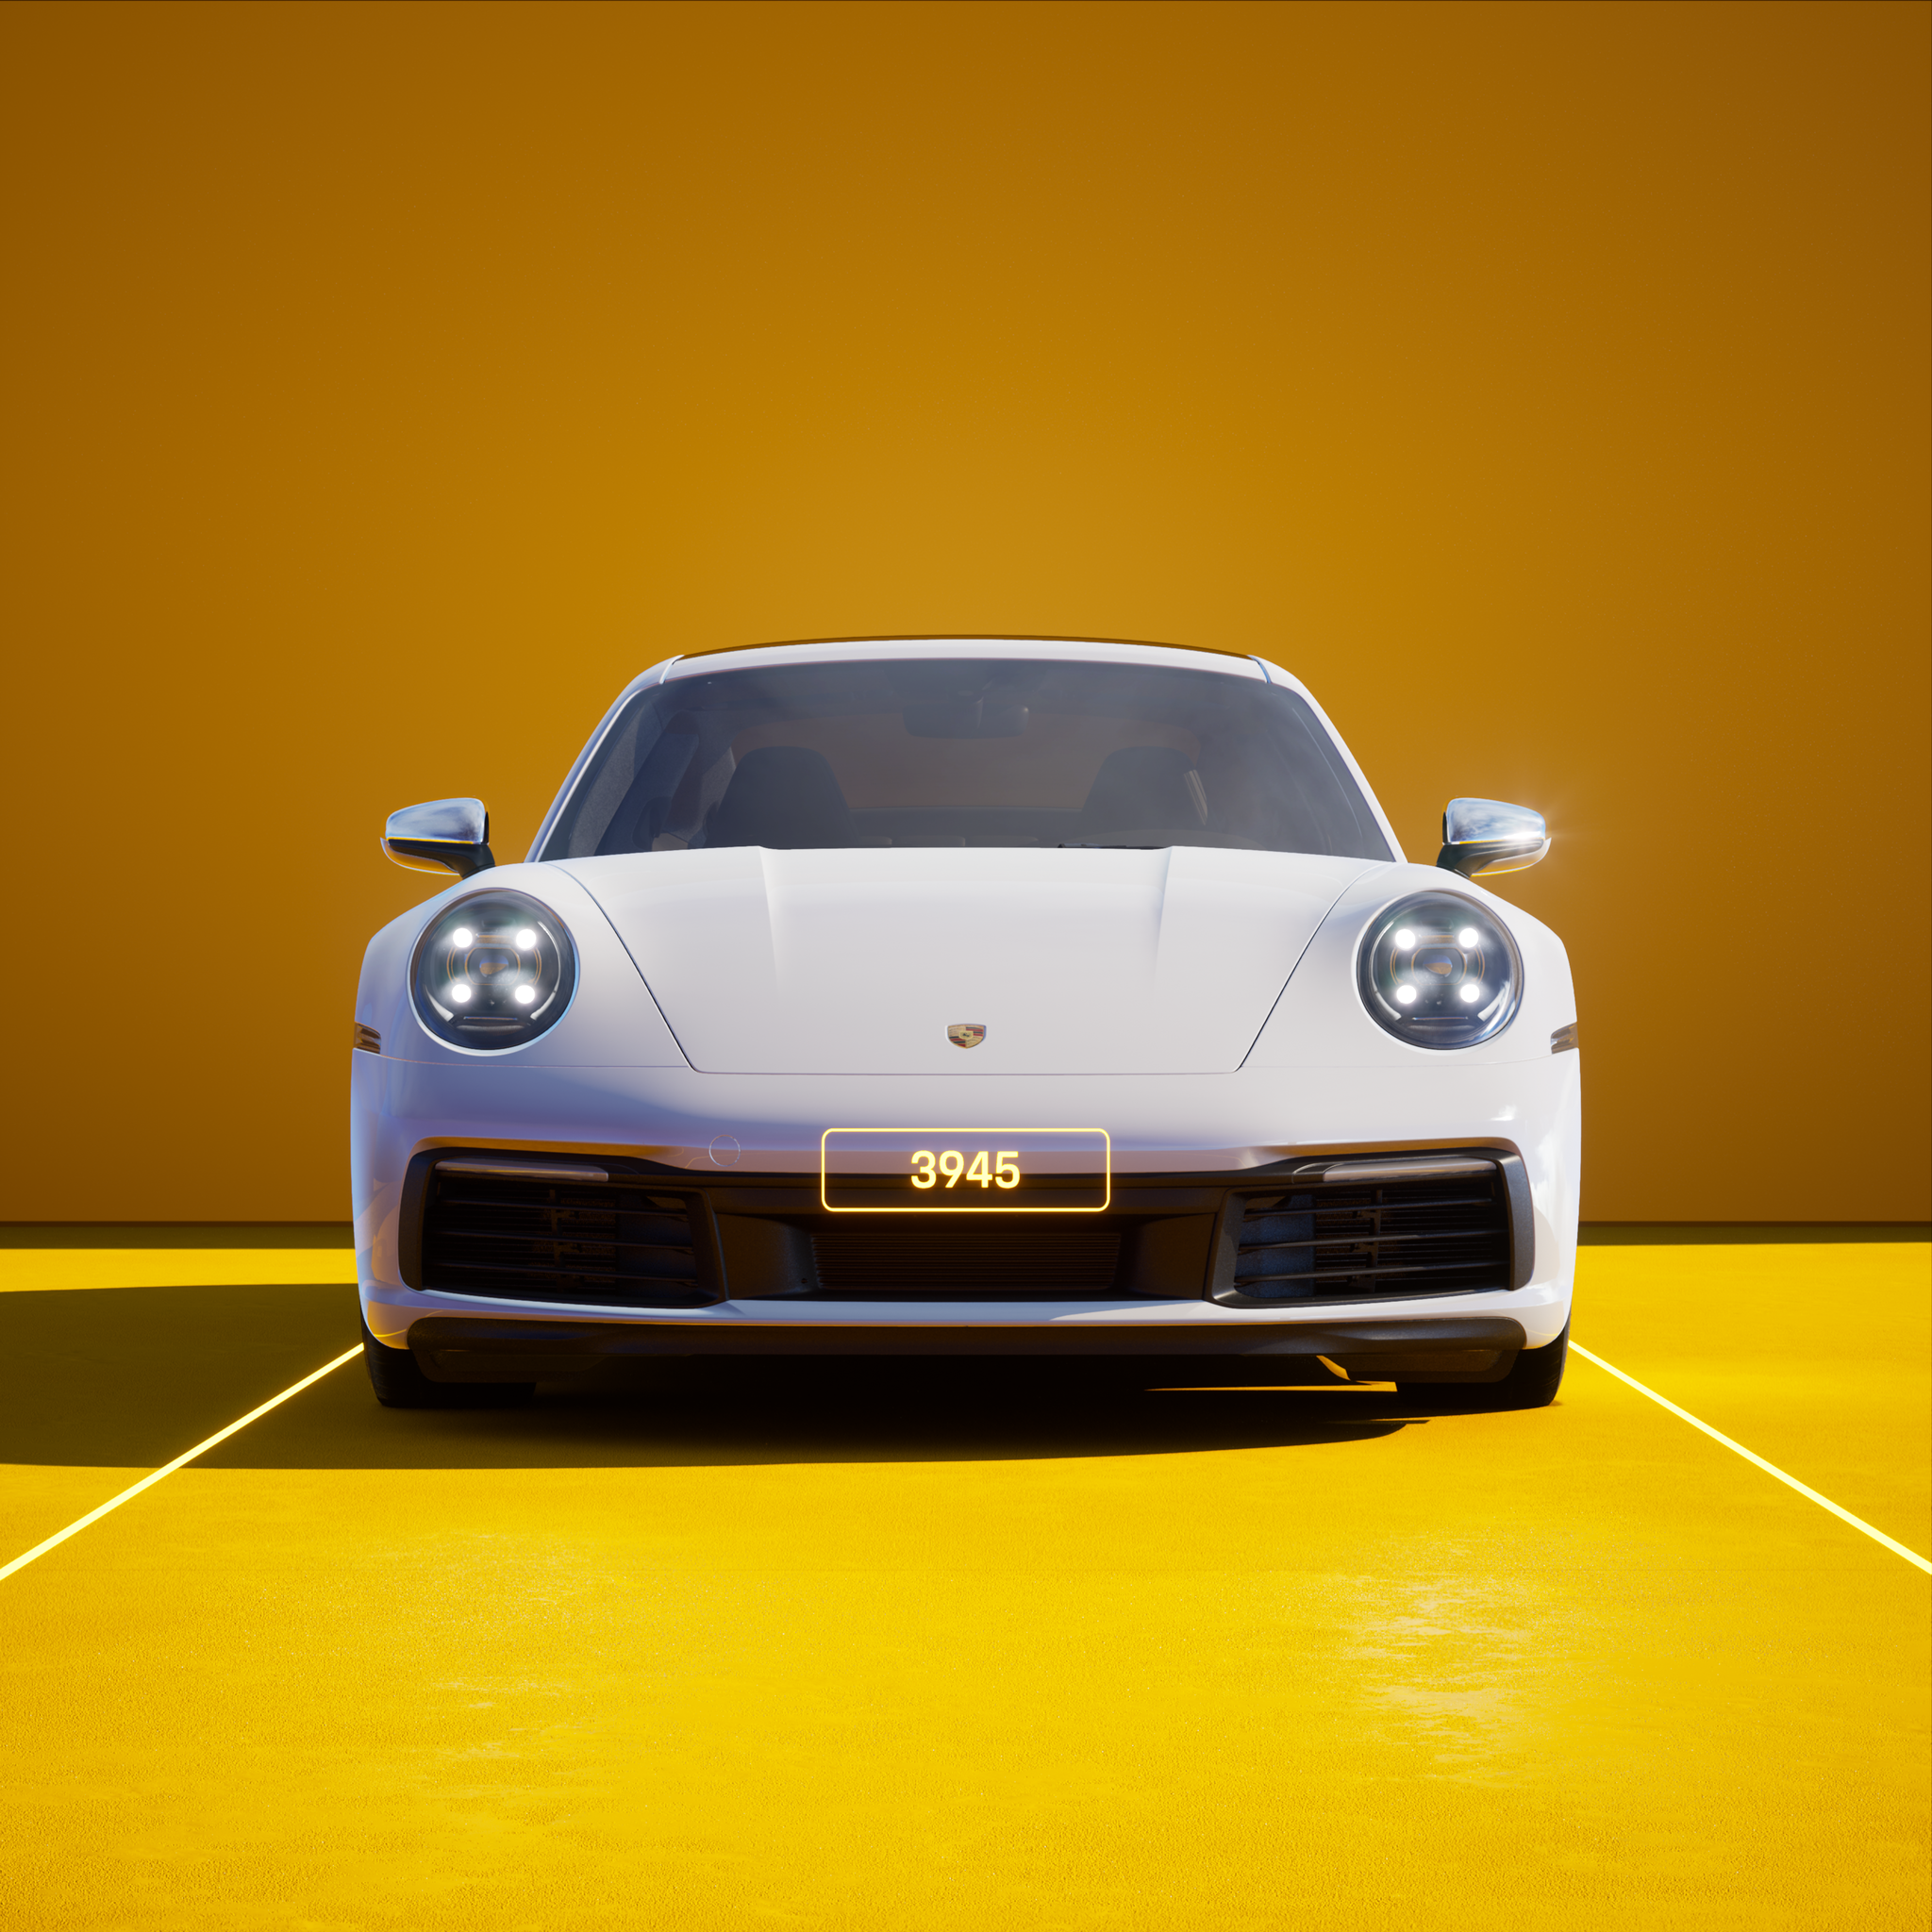 The PORSCHΞ 911 3945 image in phase